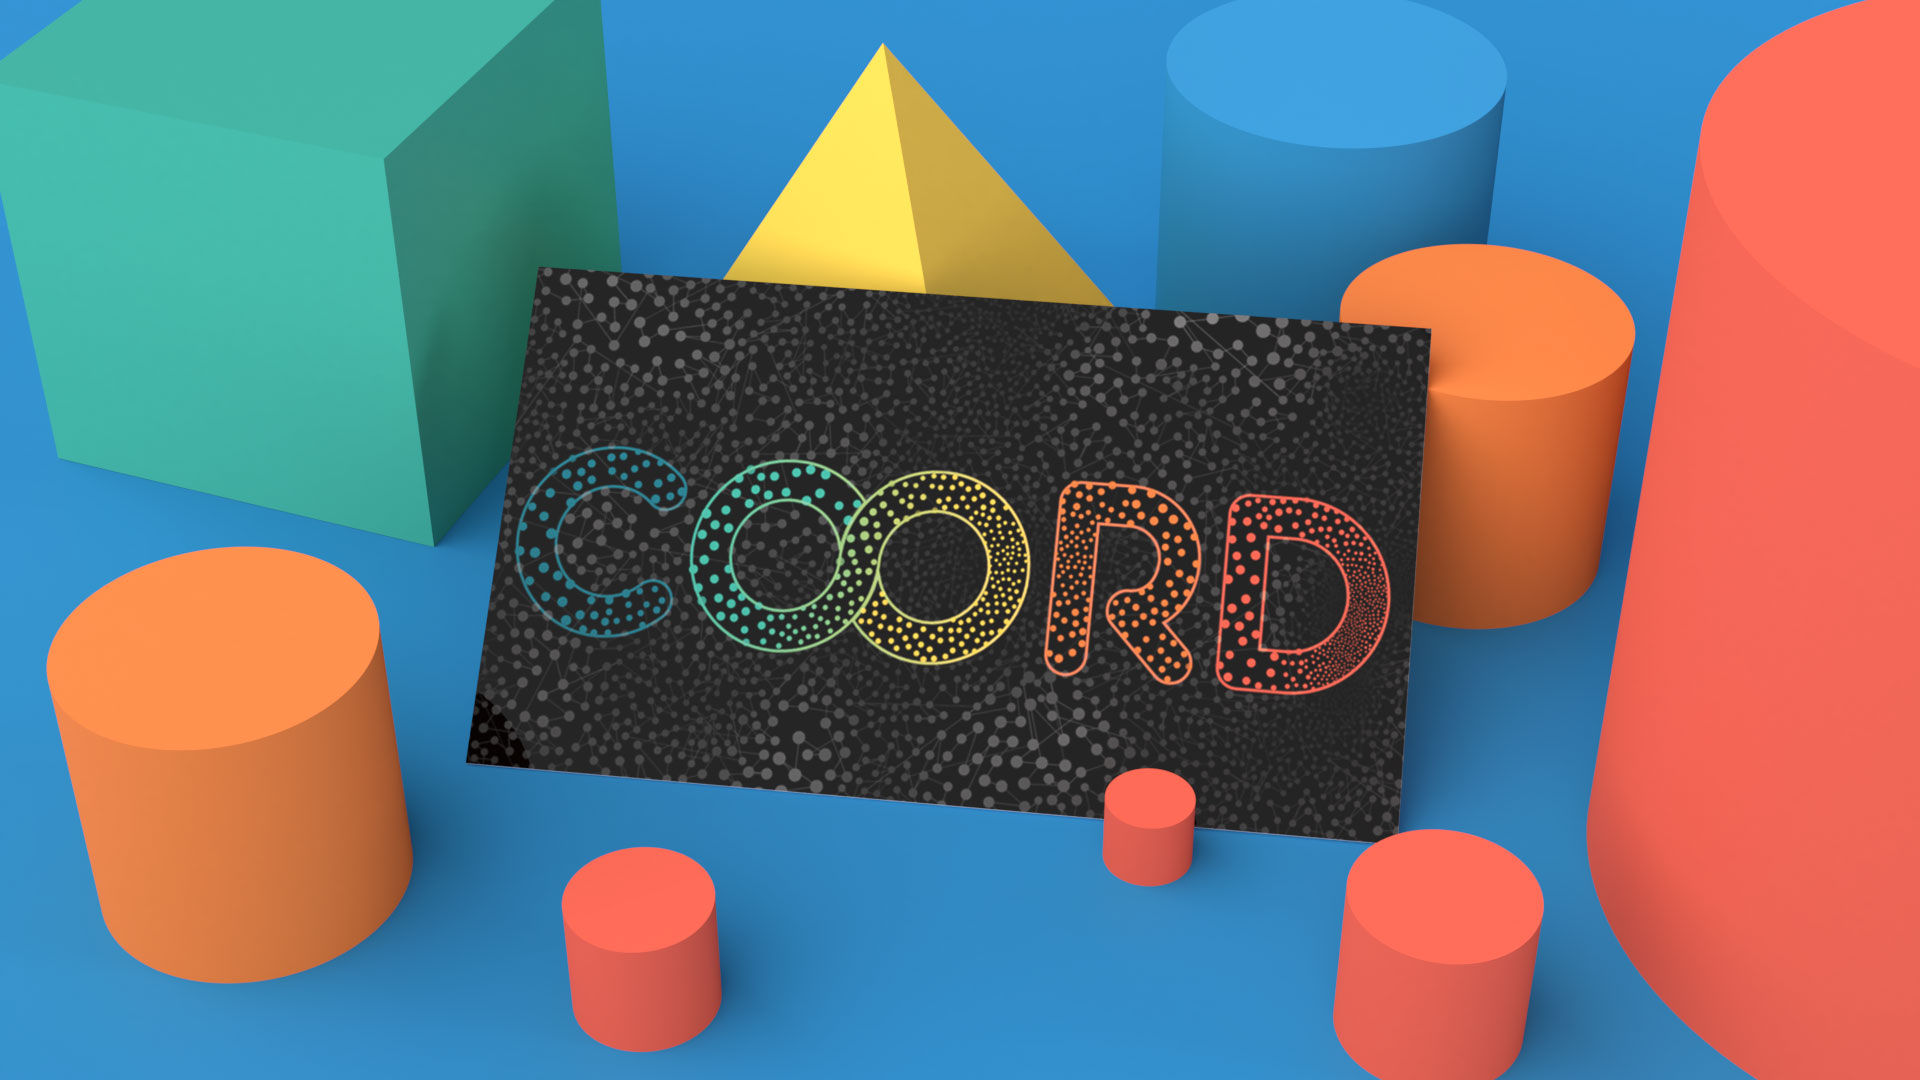 COORD Cards - Poisson Sampling